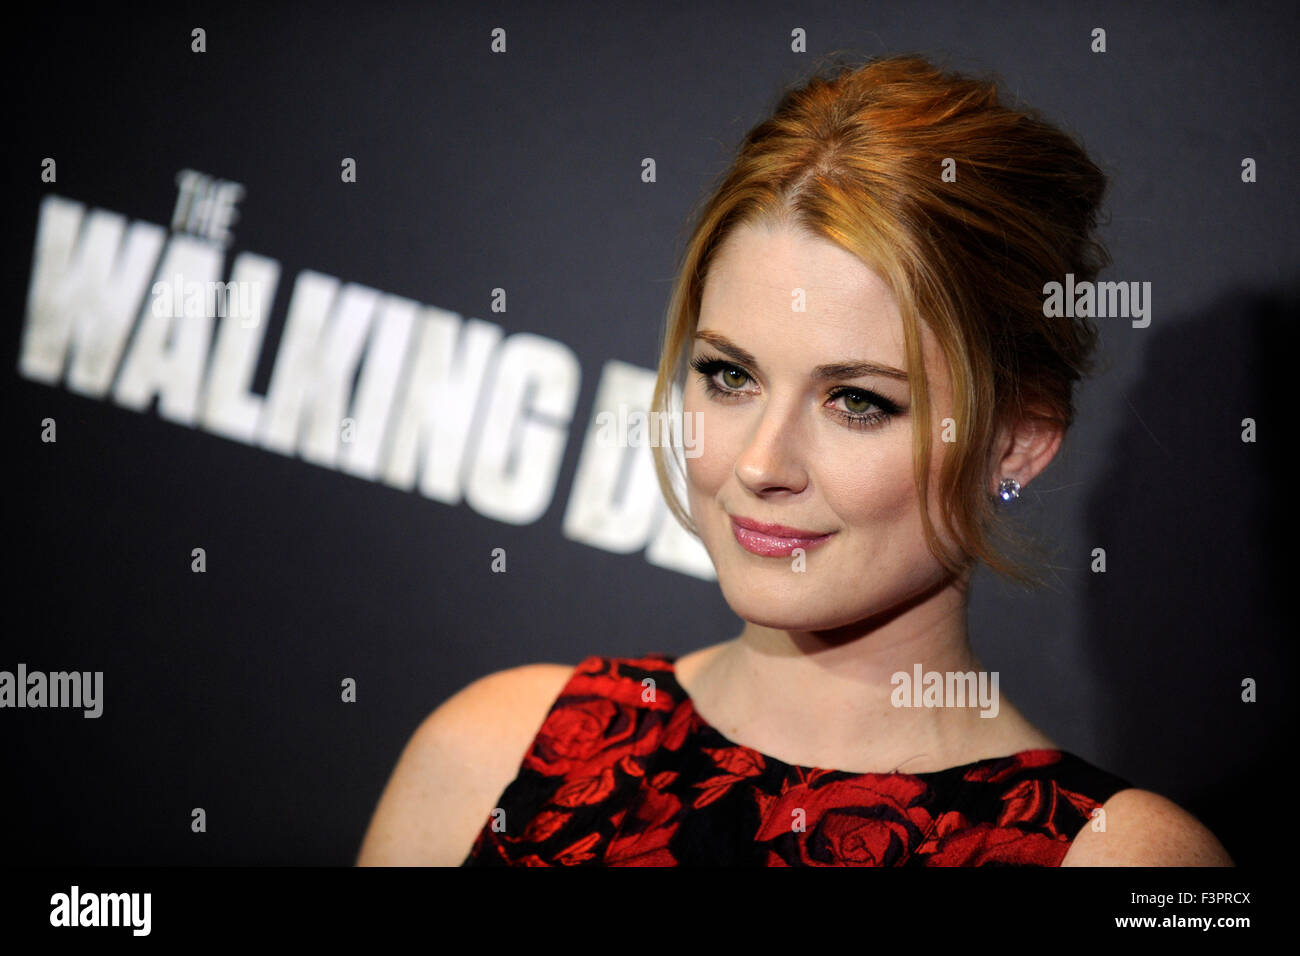 New York City. 9th Oct, 2015. Alexandra Breckenridge attends AMC's 'The Walking Dead' Season 6 Fan Premiere Event 2015 at Madison Square Garden on October 9, 2015 in New York City. © dpa/Alamy Live News Stock Photo